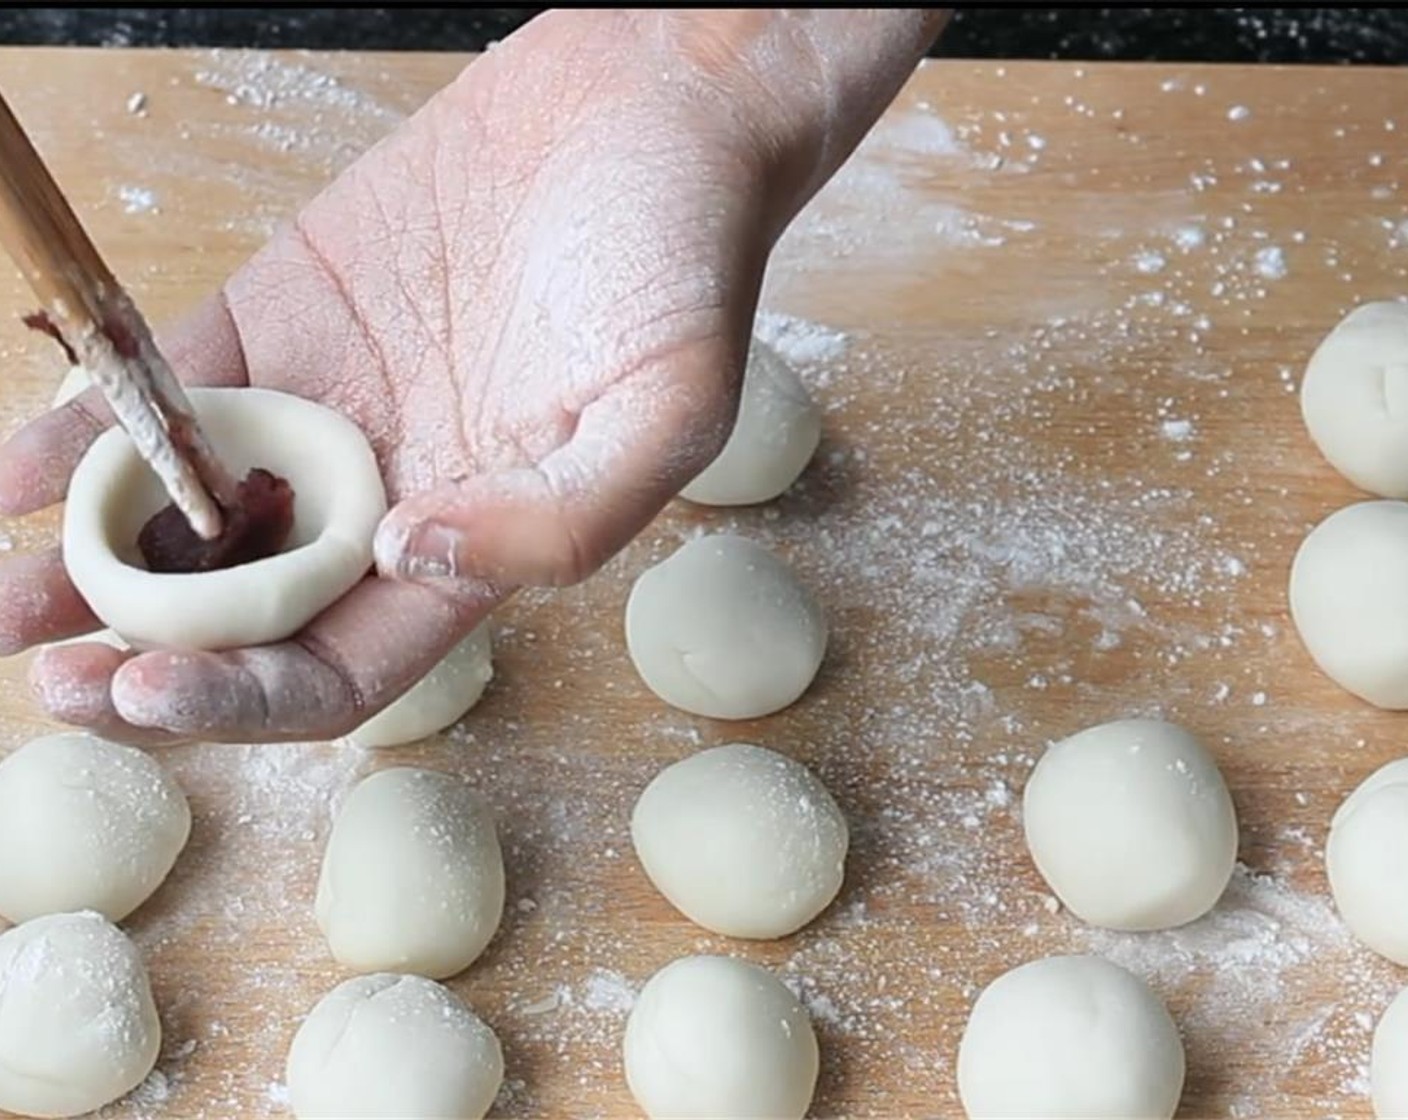 step 4 Further shape the dough into long log and then divide into 20 equal portions. Shape each portion into a round ball. Then, shape each round ball into bowls, and wrap around 1 teaspoon of the Red Bean Paste (3 Tbsp) in. Seal completely and shape into balls again.